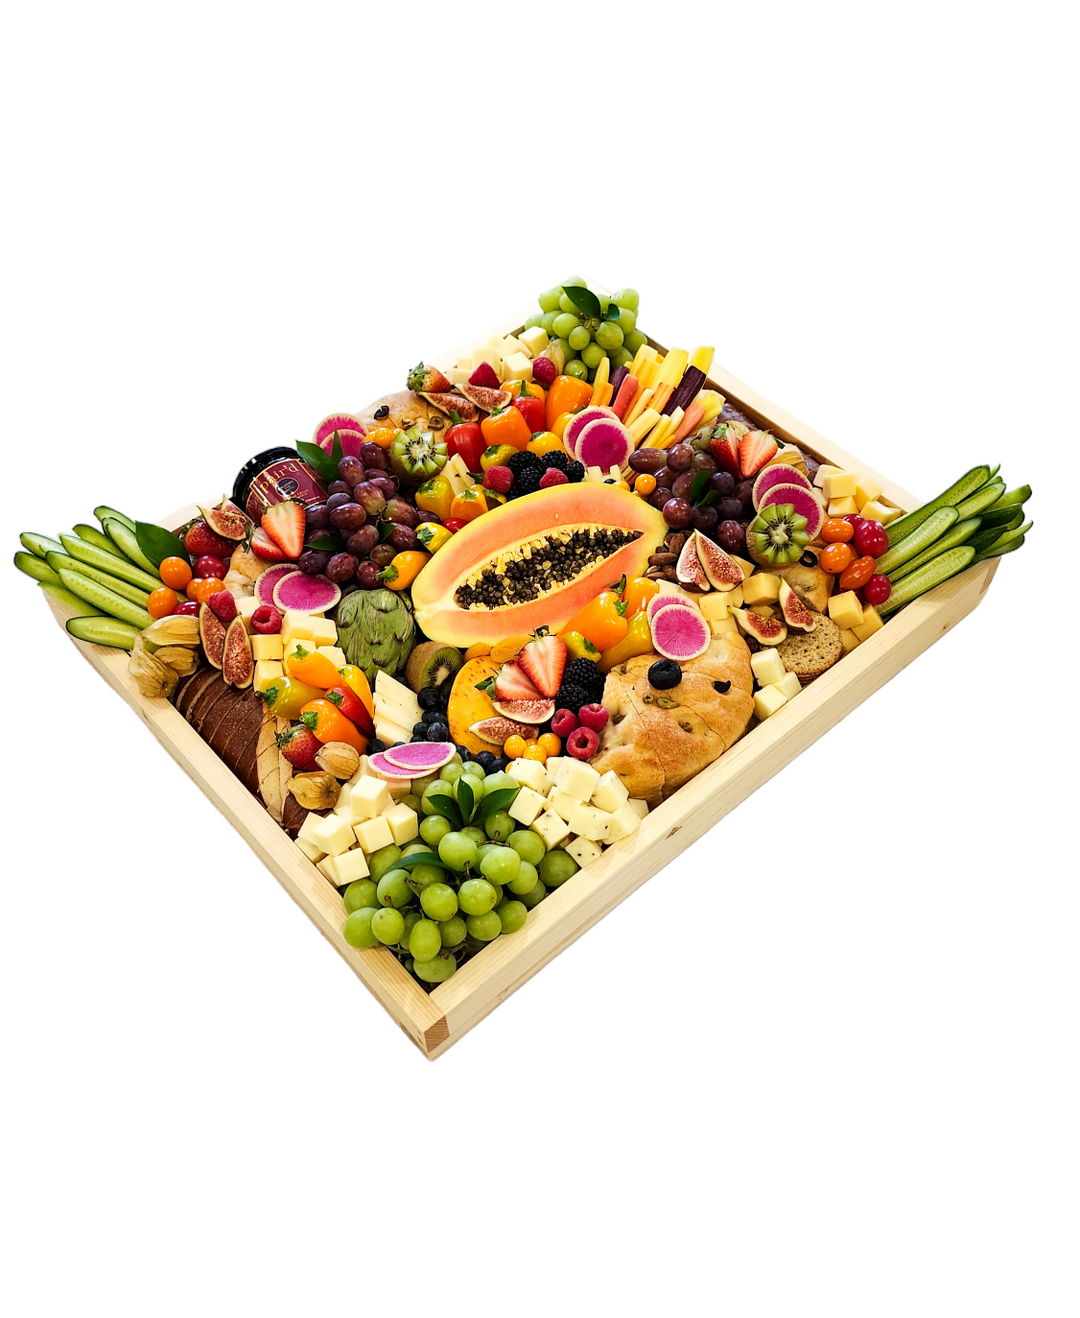 Party size 2 Foot Charcuterie Platter